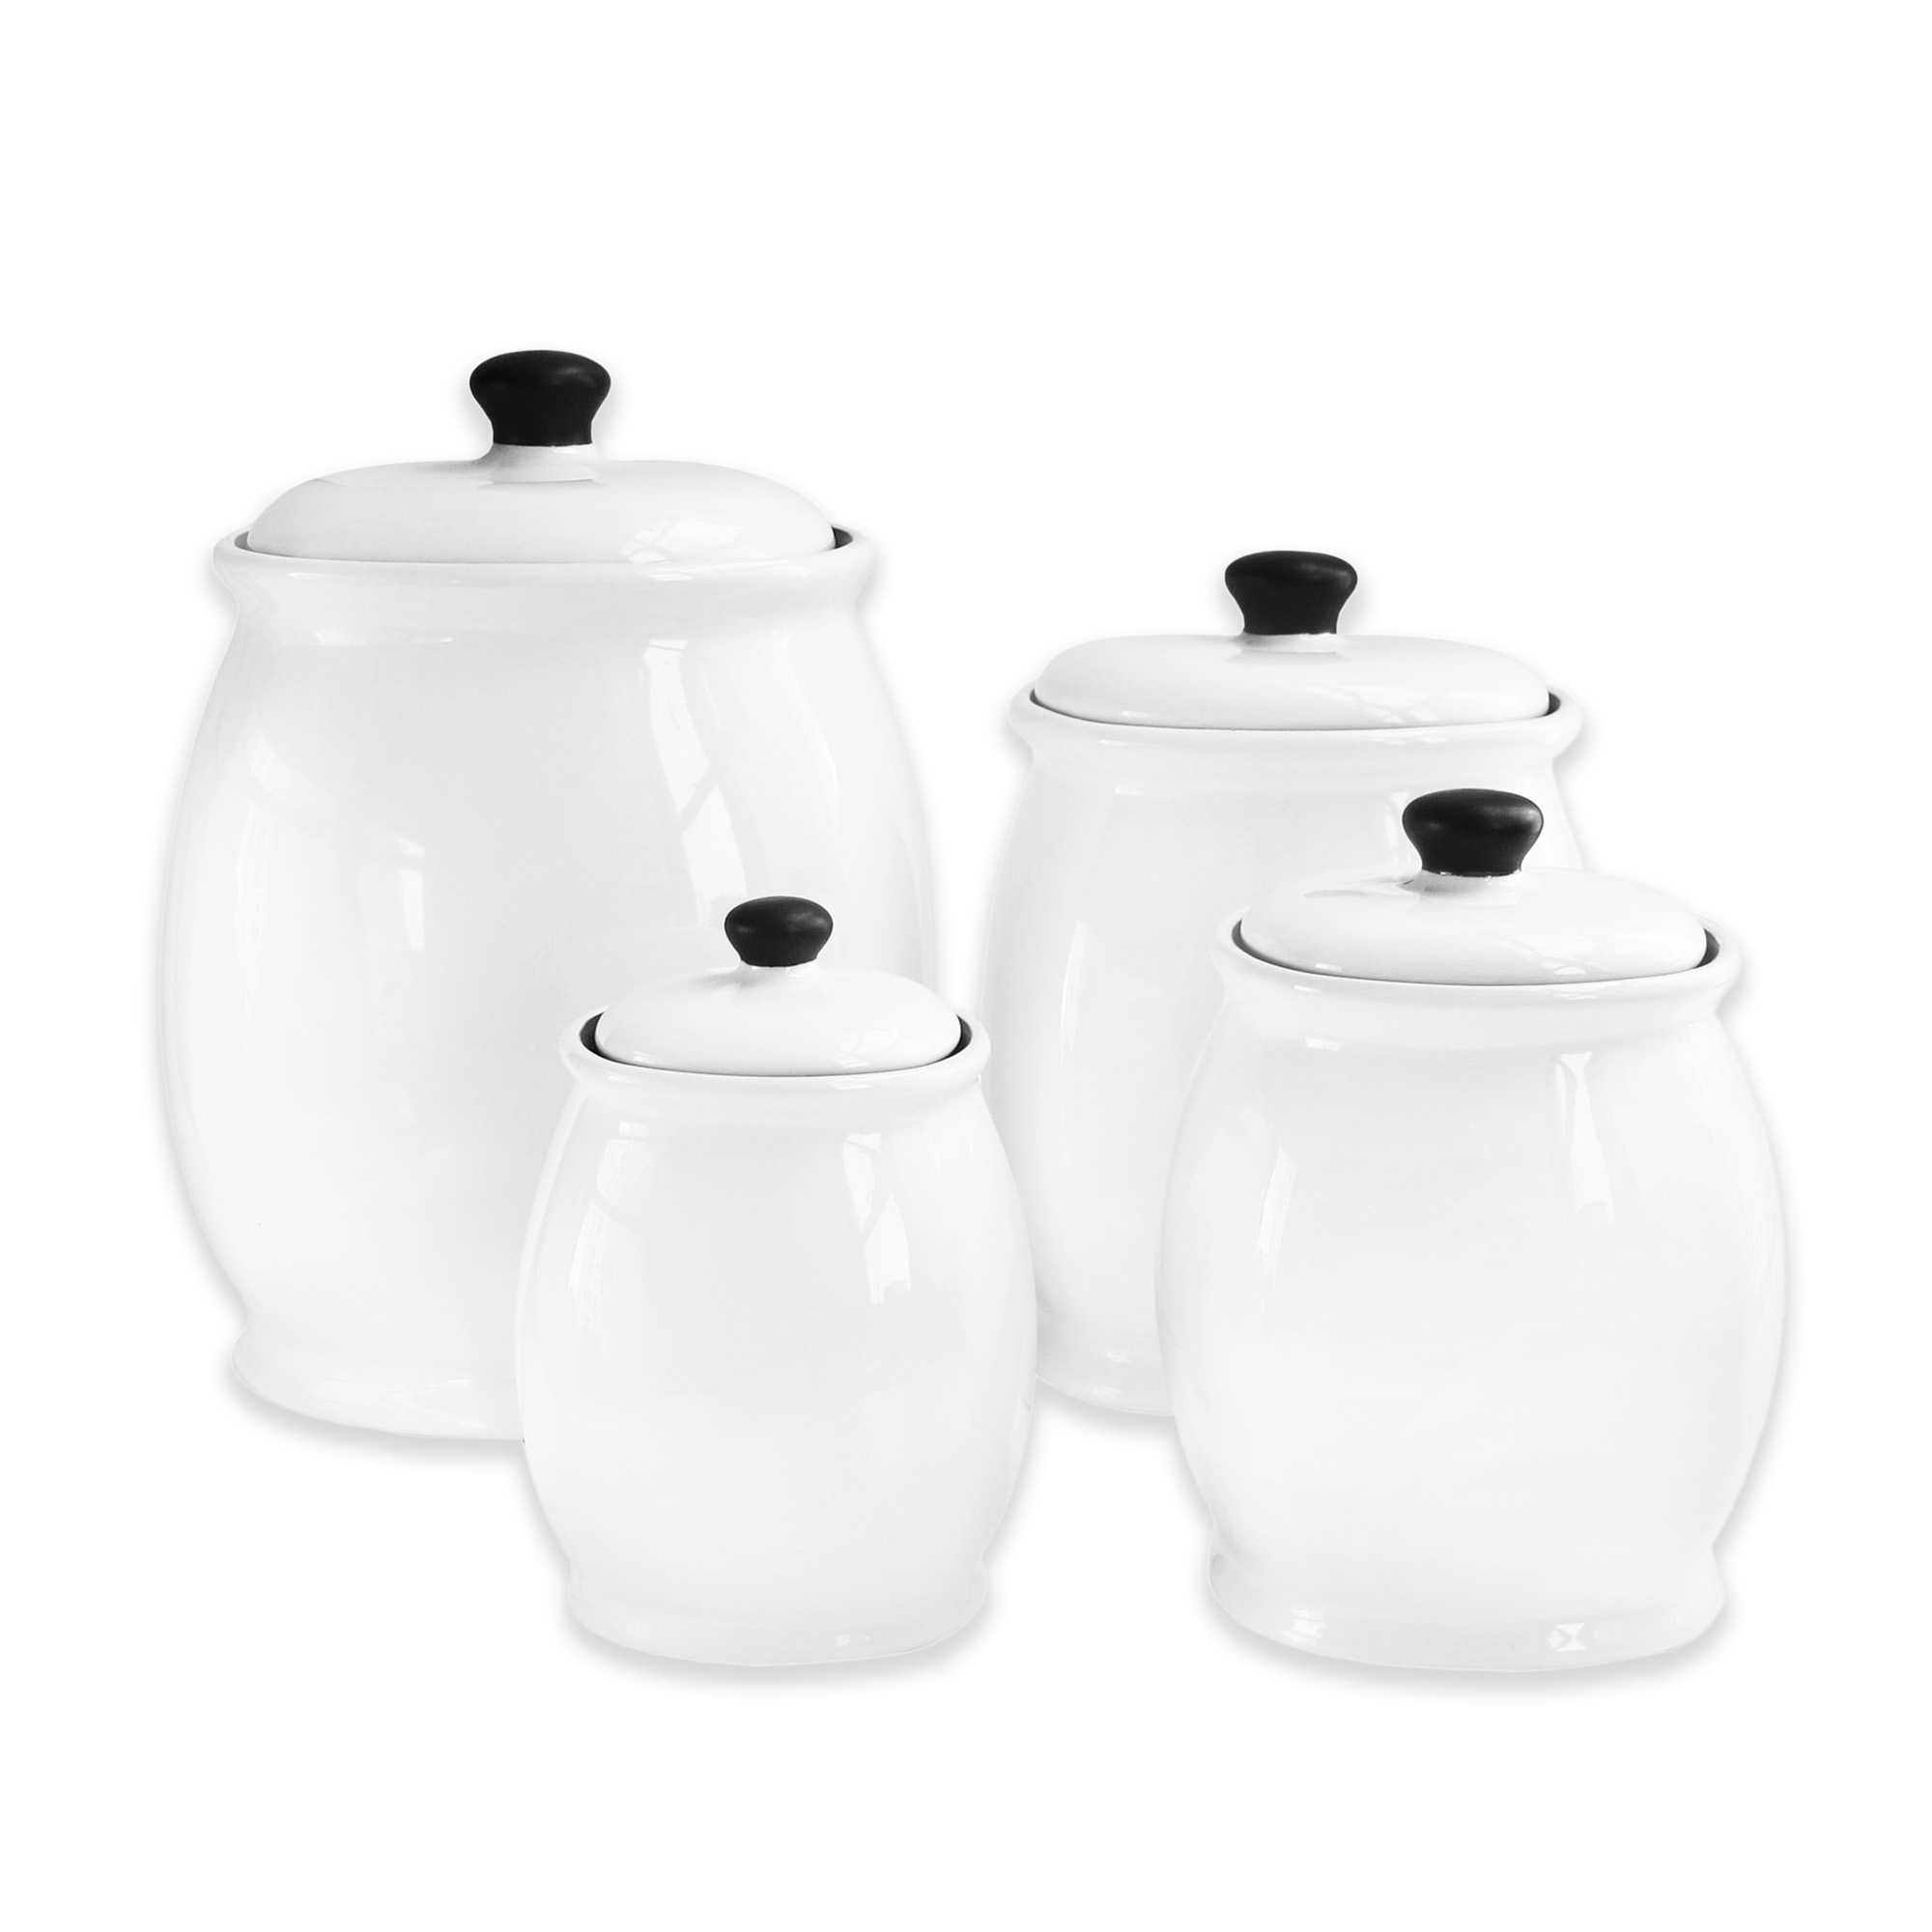 American Atelier 4-Piece Canister Set in White | Bed Bath & Beyond